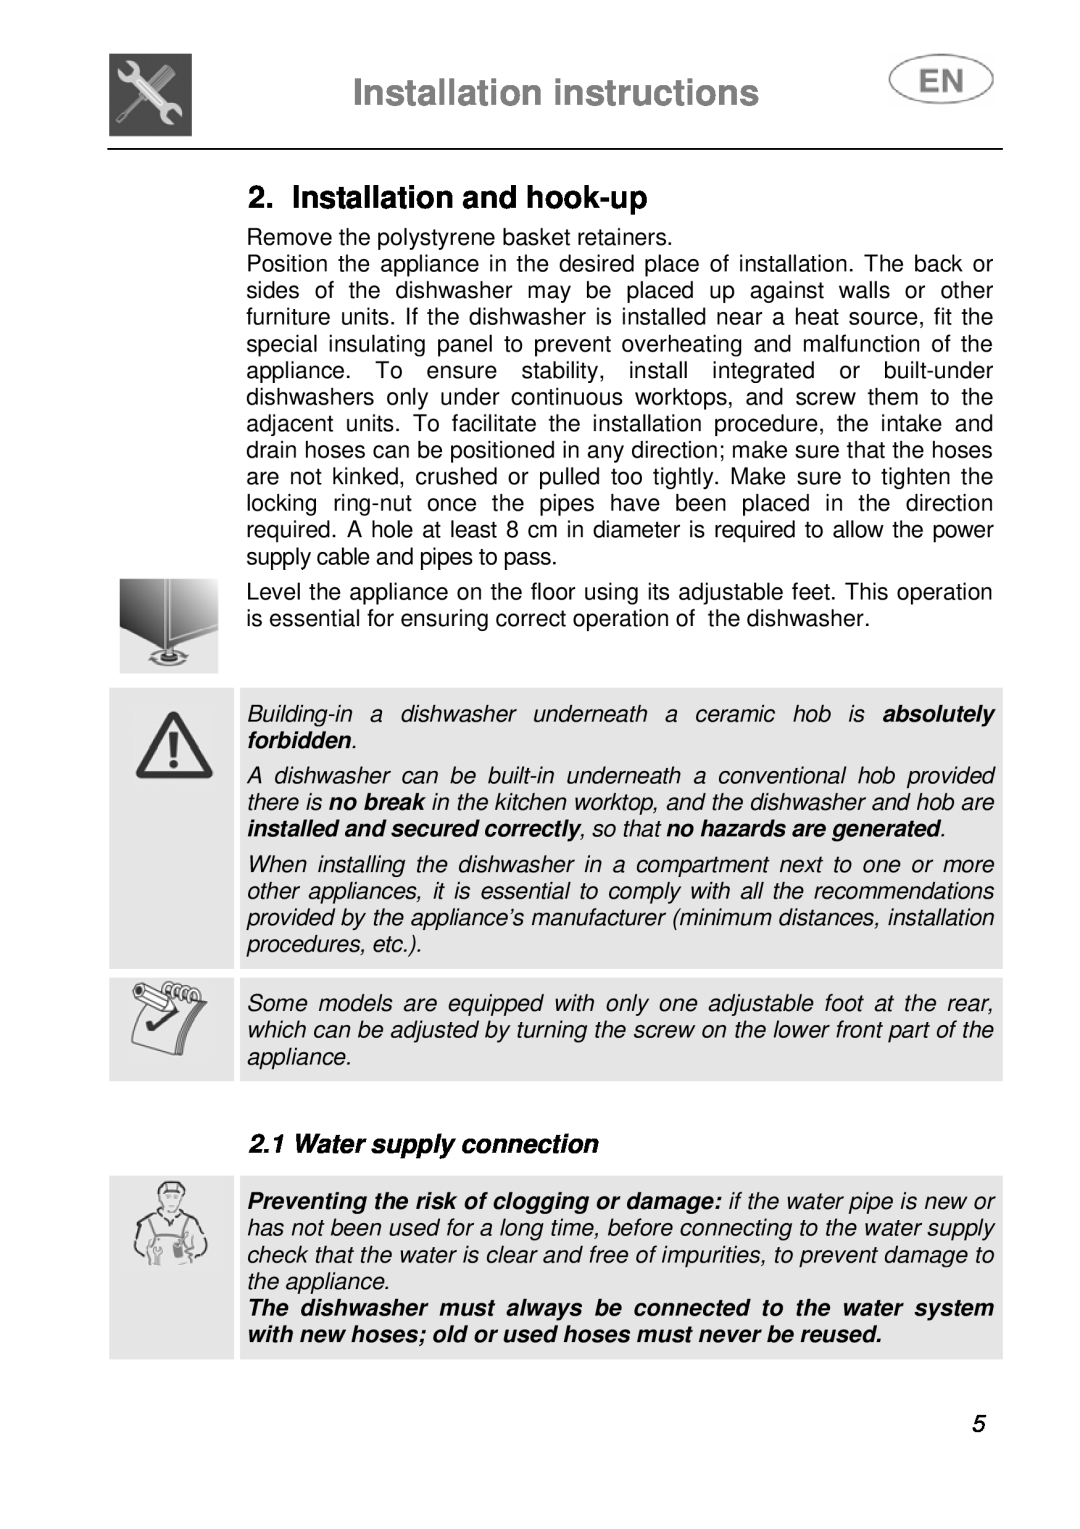 Smeg LSA14X7 instruction manual Installation instructions, Installation and hook-up, Water supply connection 